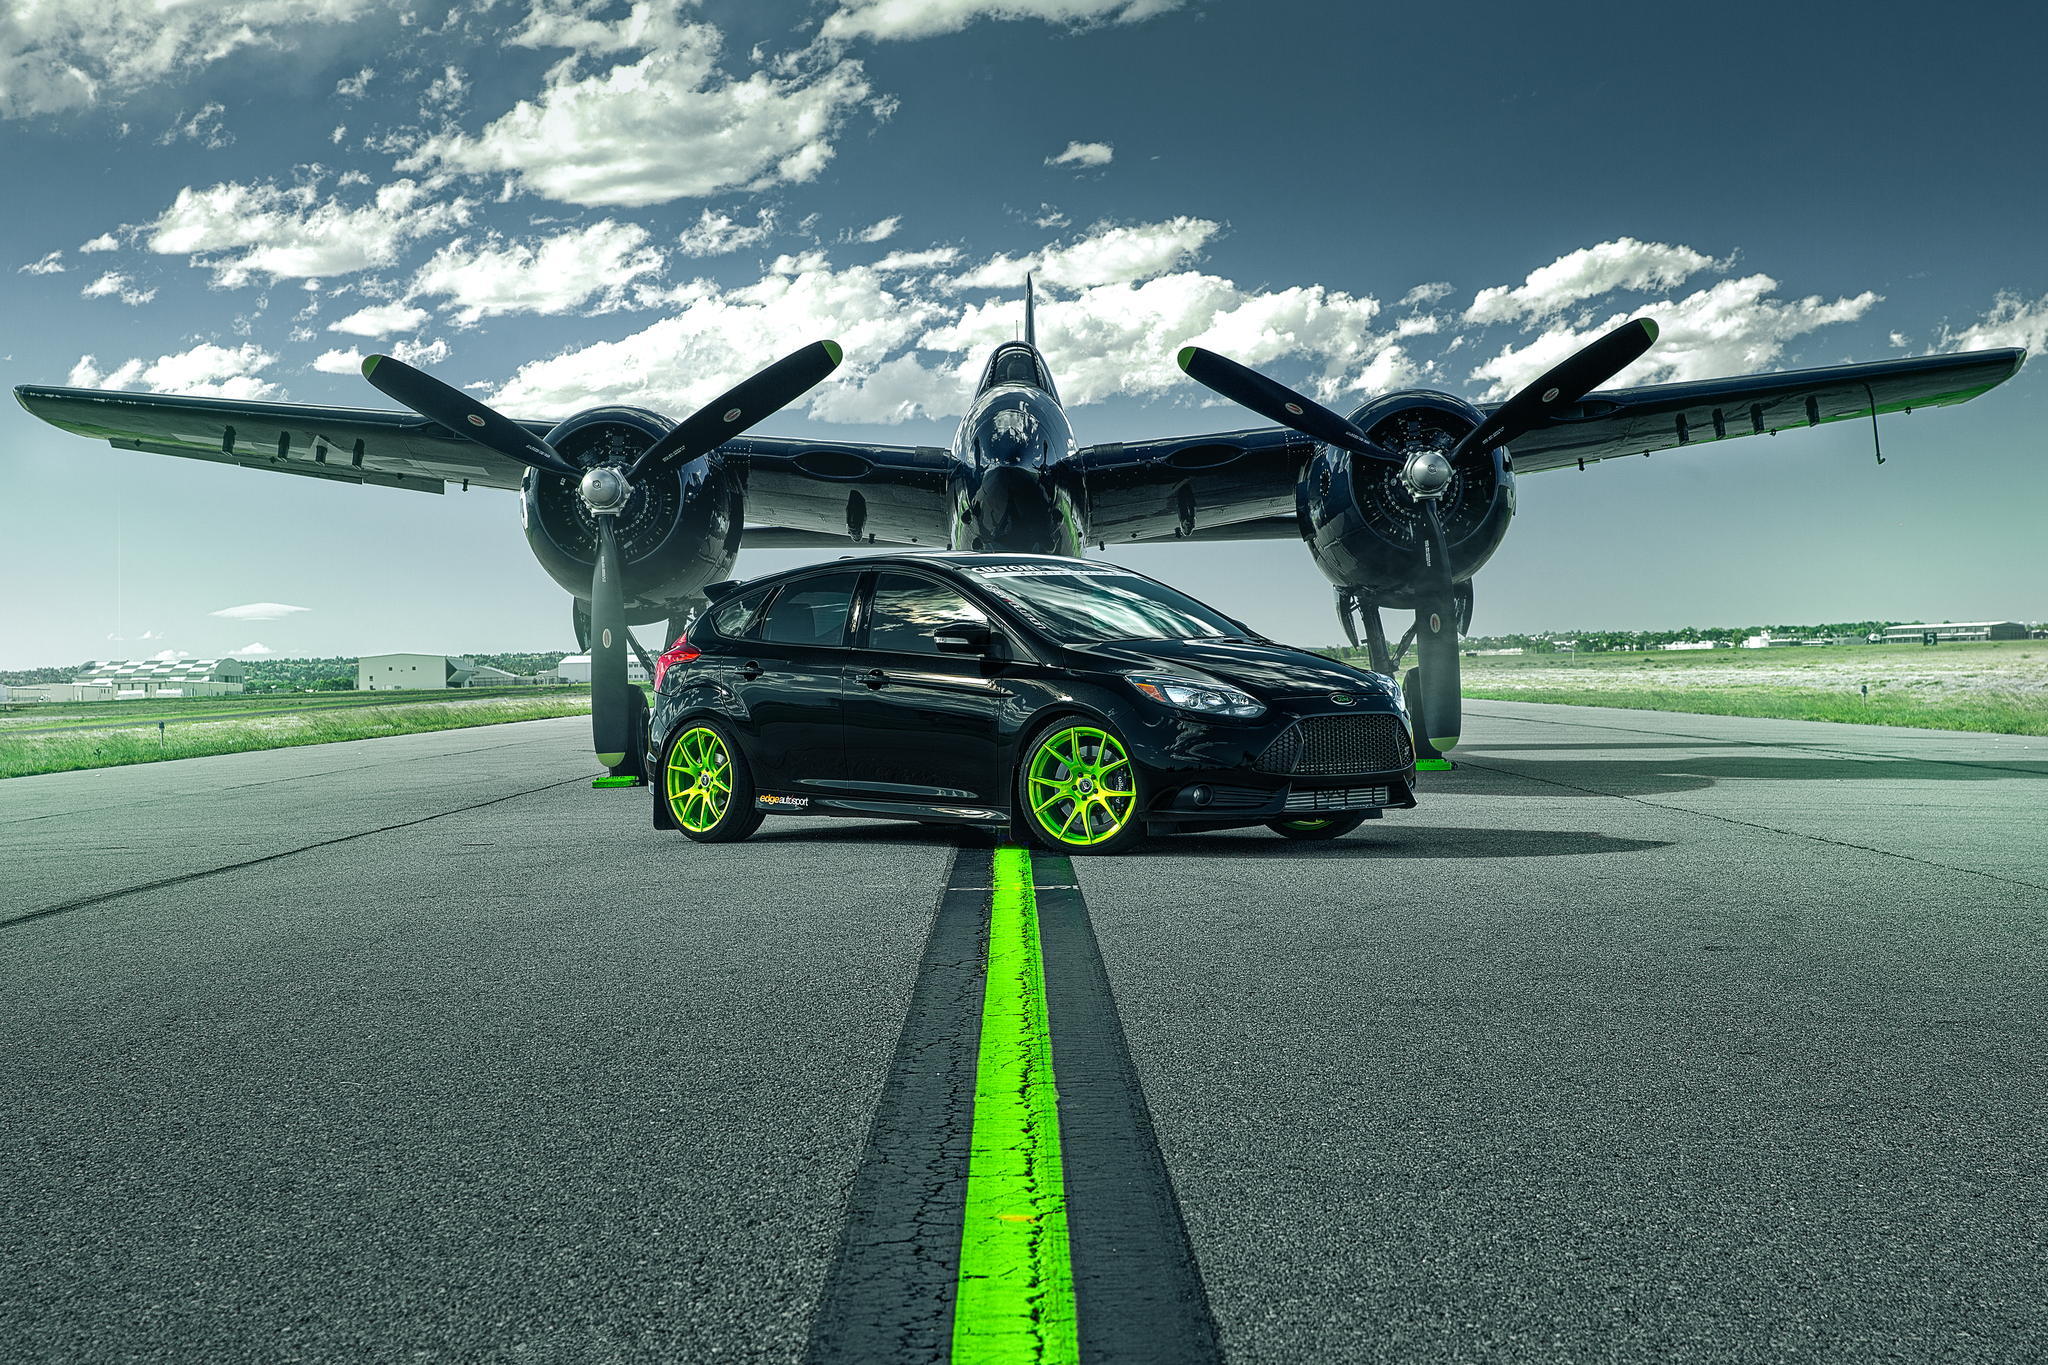 ford, cars, plane, airplane, runway, st, ford focus